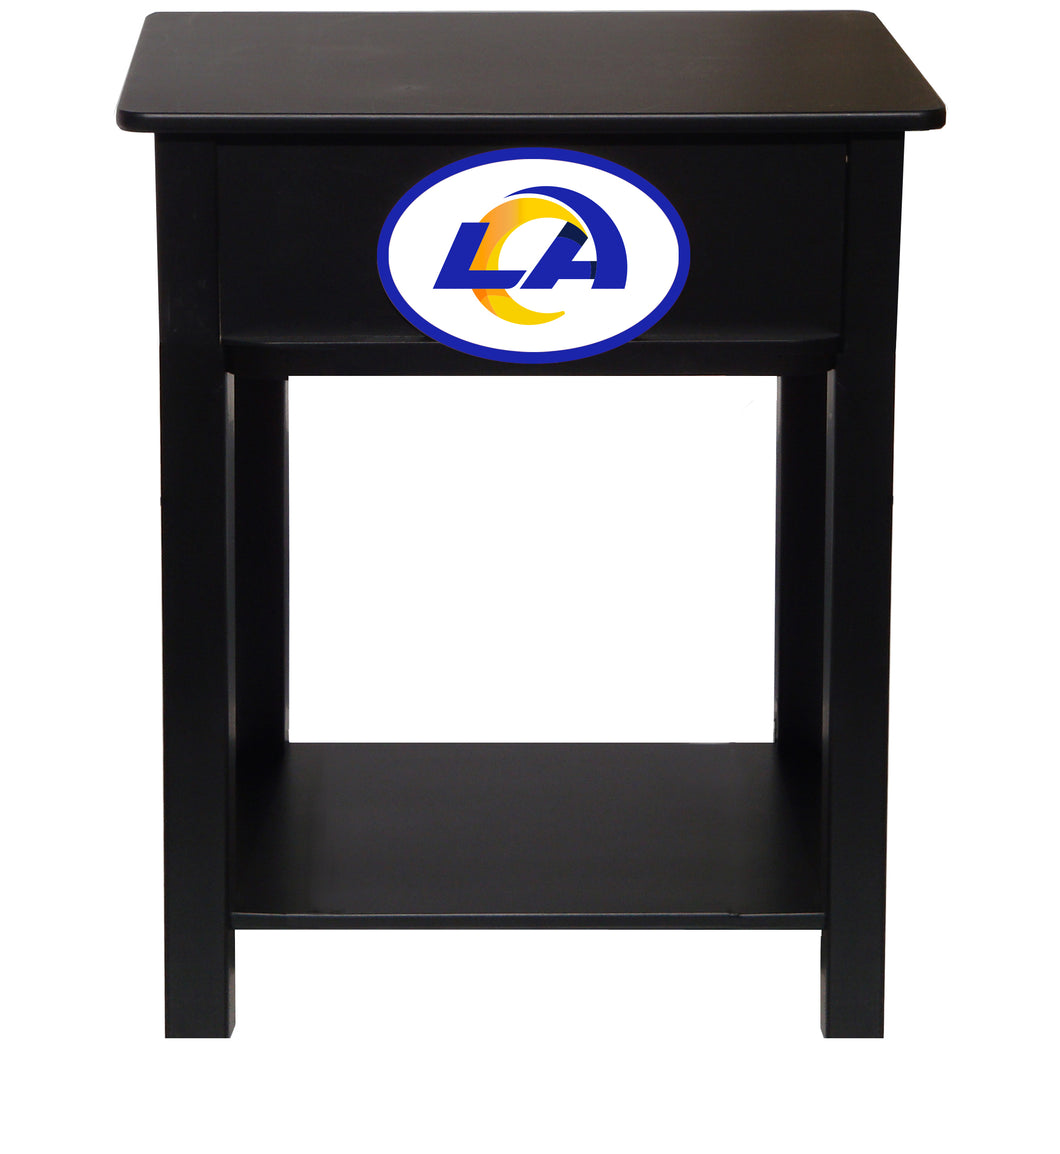 Los Angeles Rams Champions NFL Sculpture Featuring A Beveled Glass